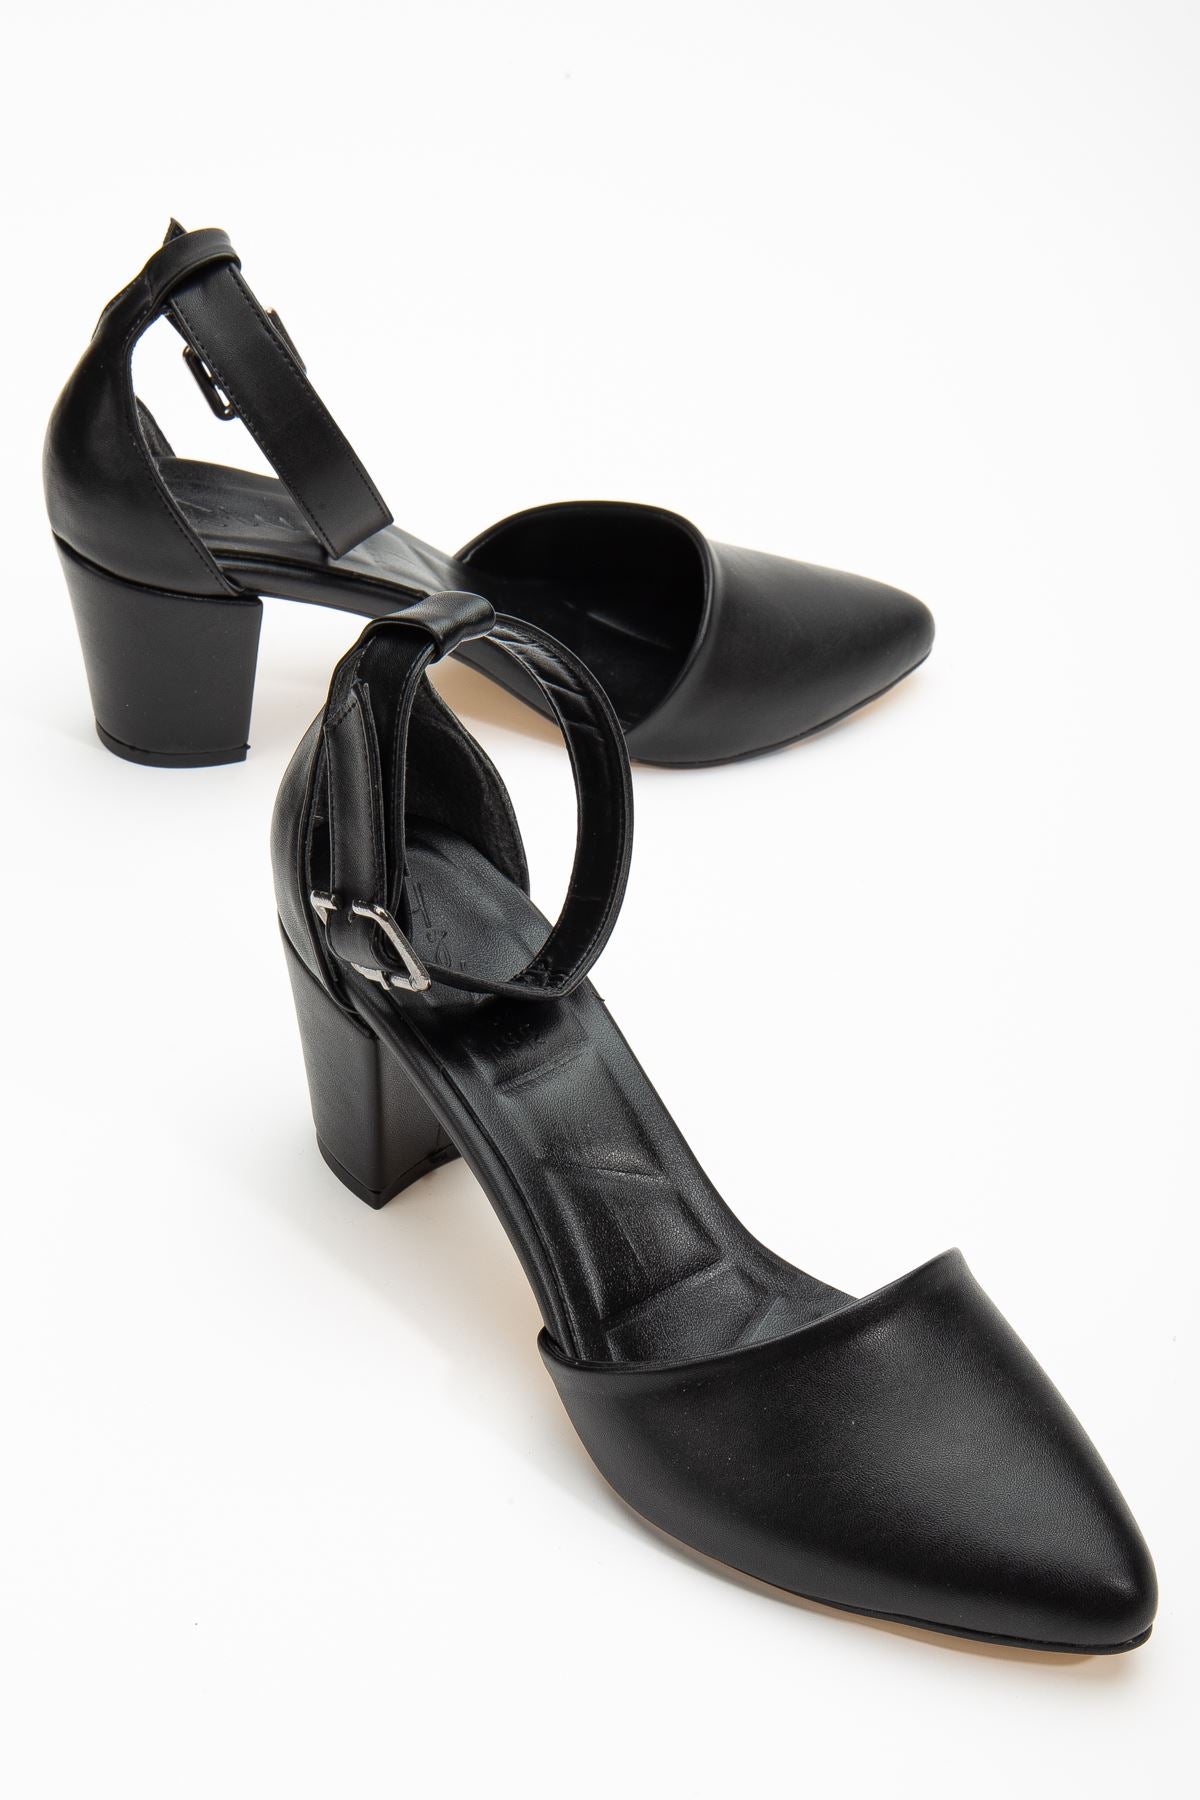 Lottis Black Leather Detailed Heeled Women's Shoes - STREETMODE™